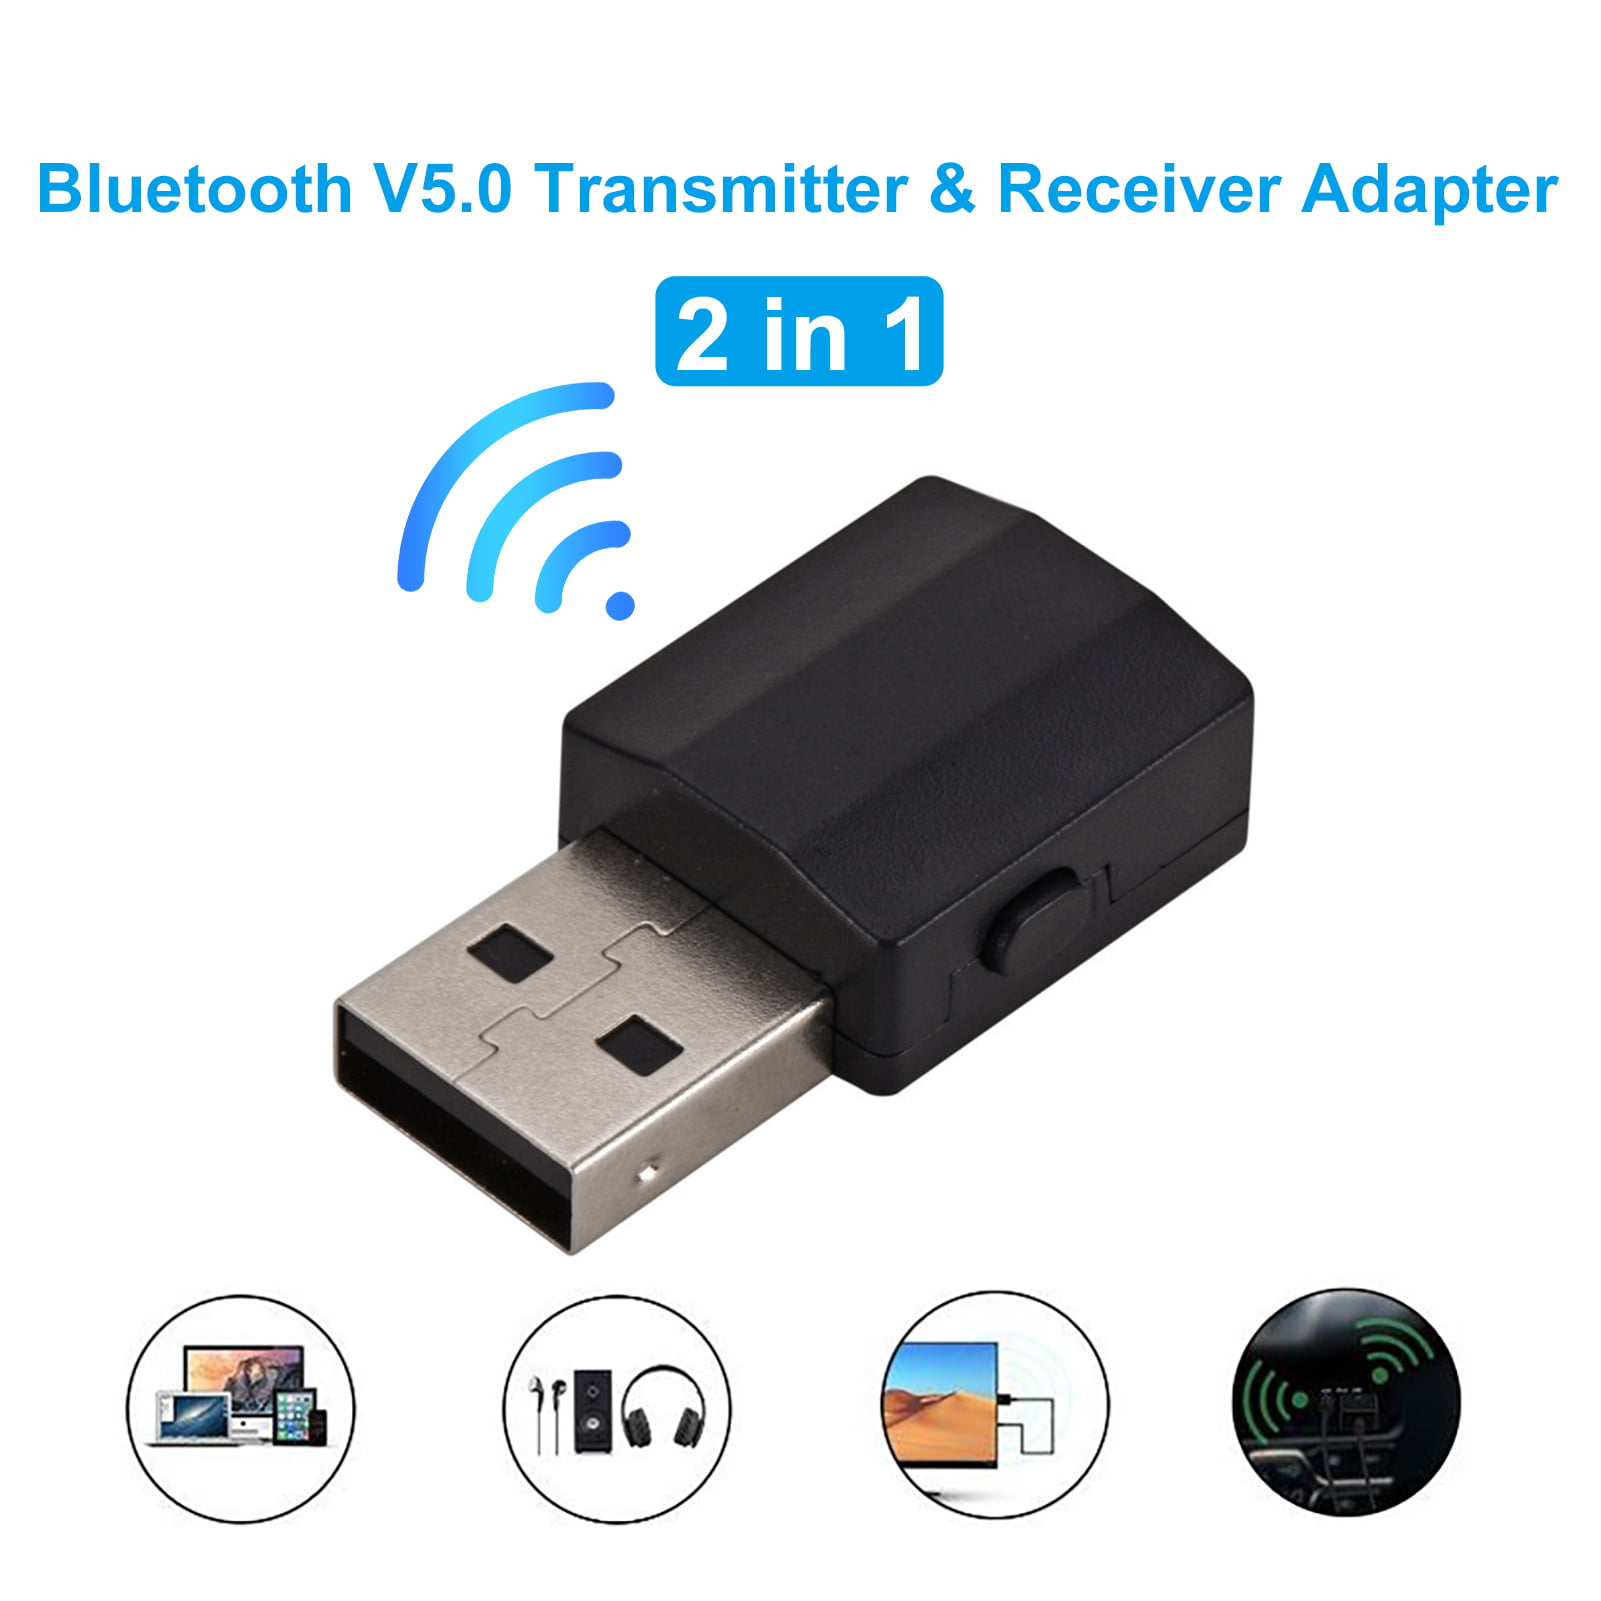 Funarrow Bluetooth 5.0 Dongle Receiver Transmitter 2 in 1 USB Car Wireless Adapter TV Computer LED Display Light Plug and Play for Car/Home Stereo System